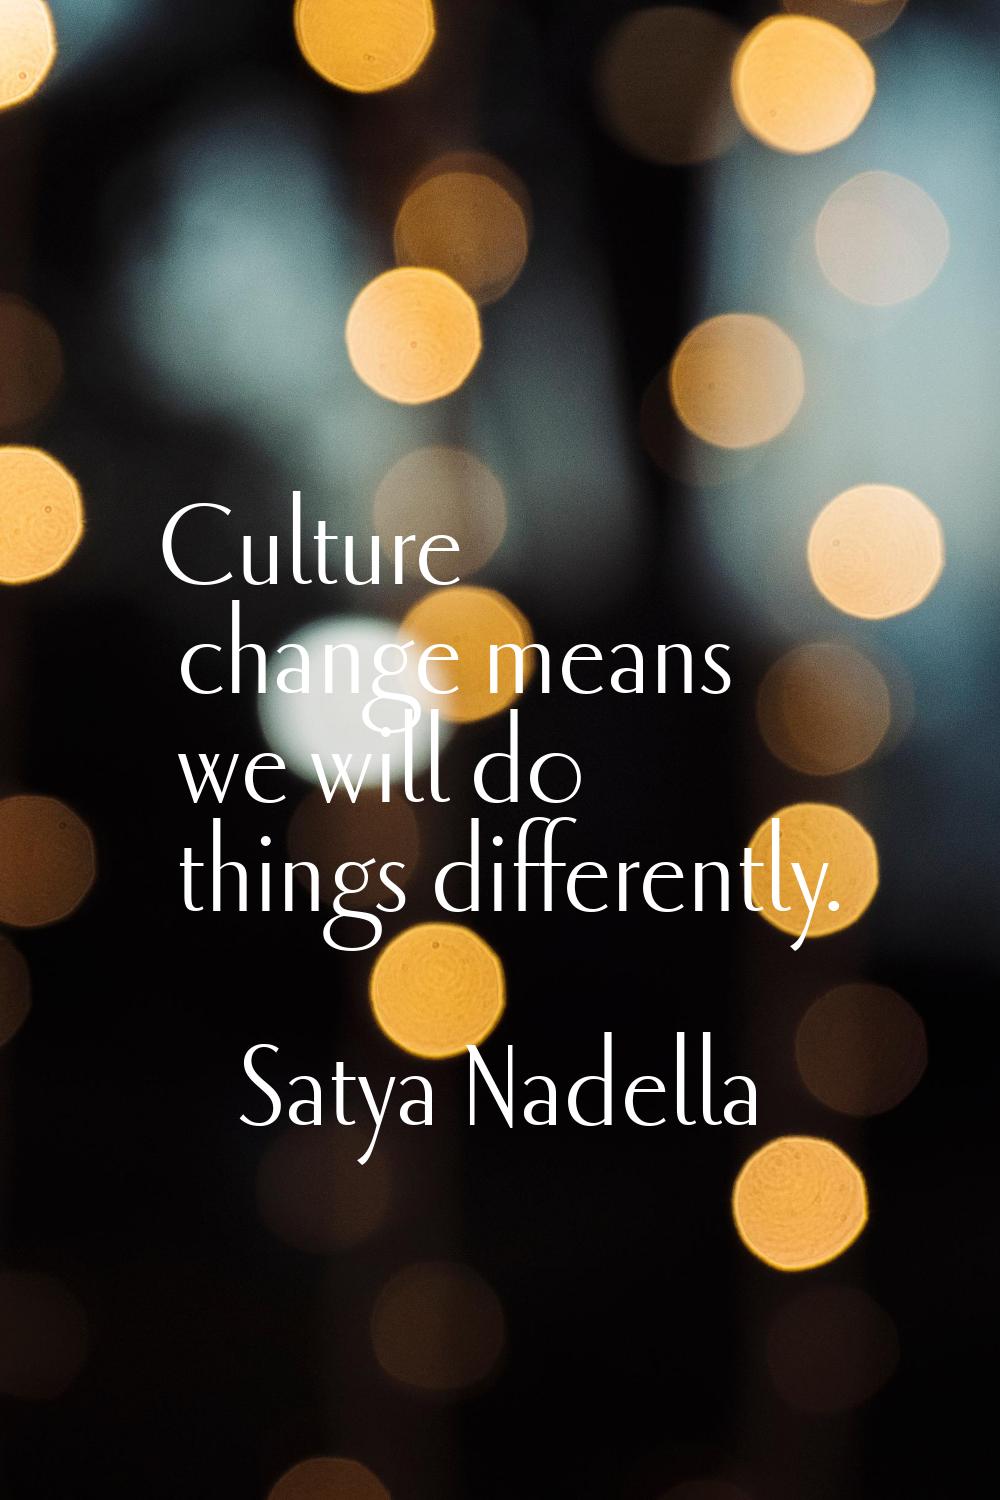 Culture change means we will do things differently.